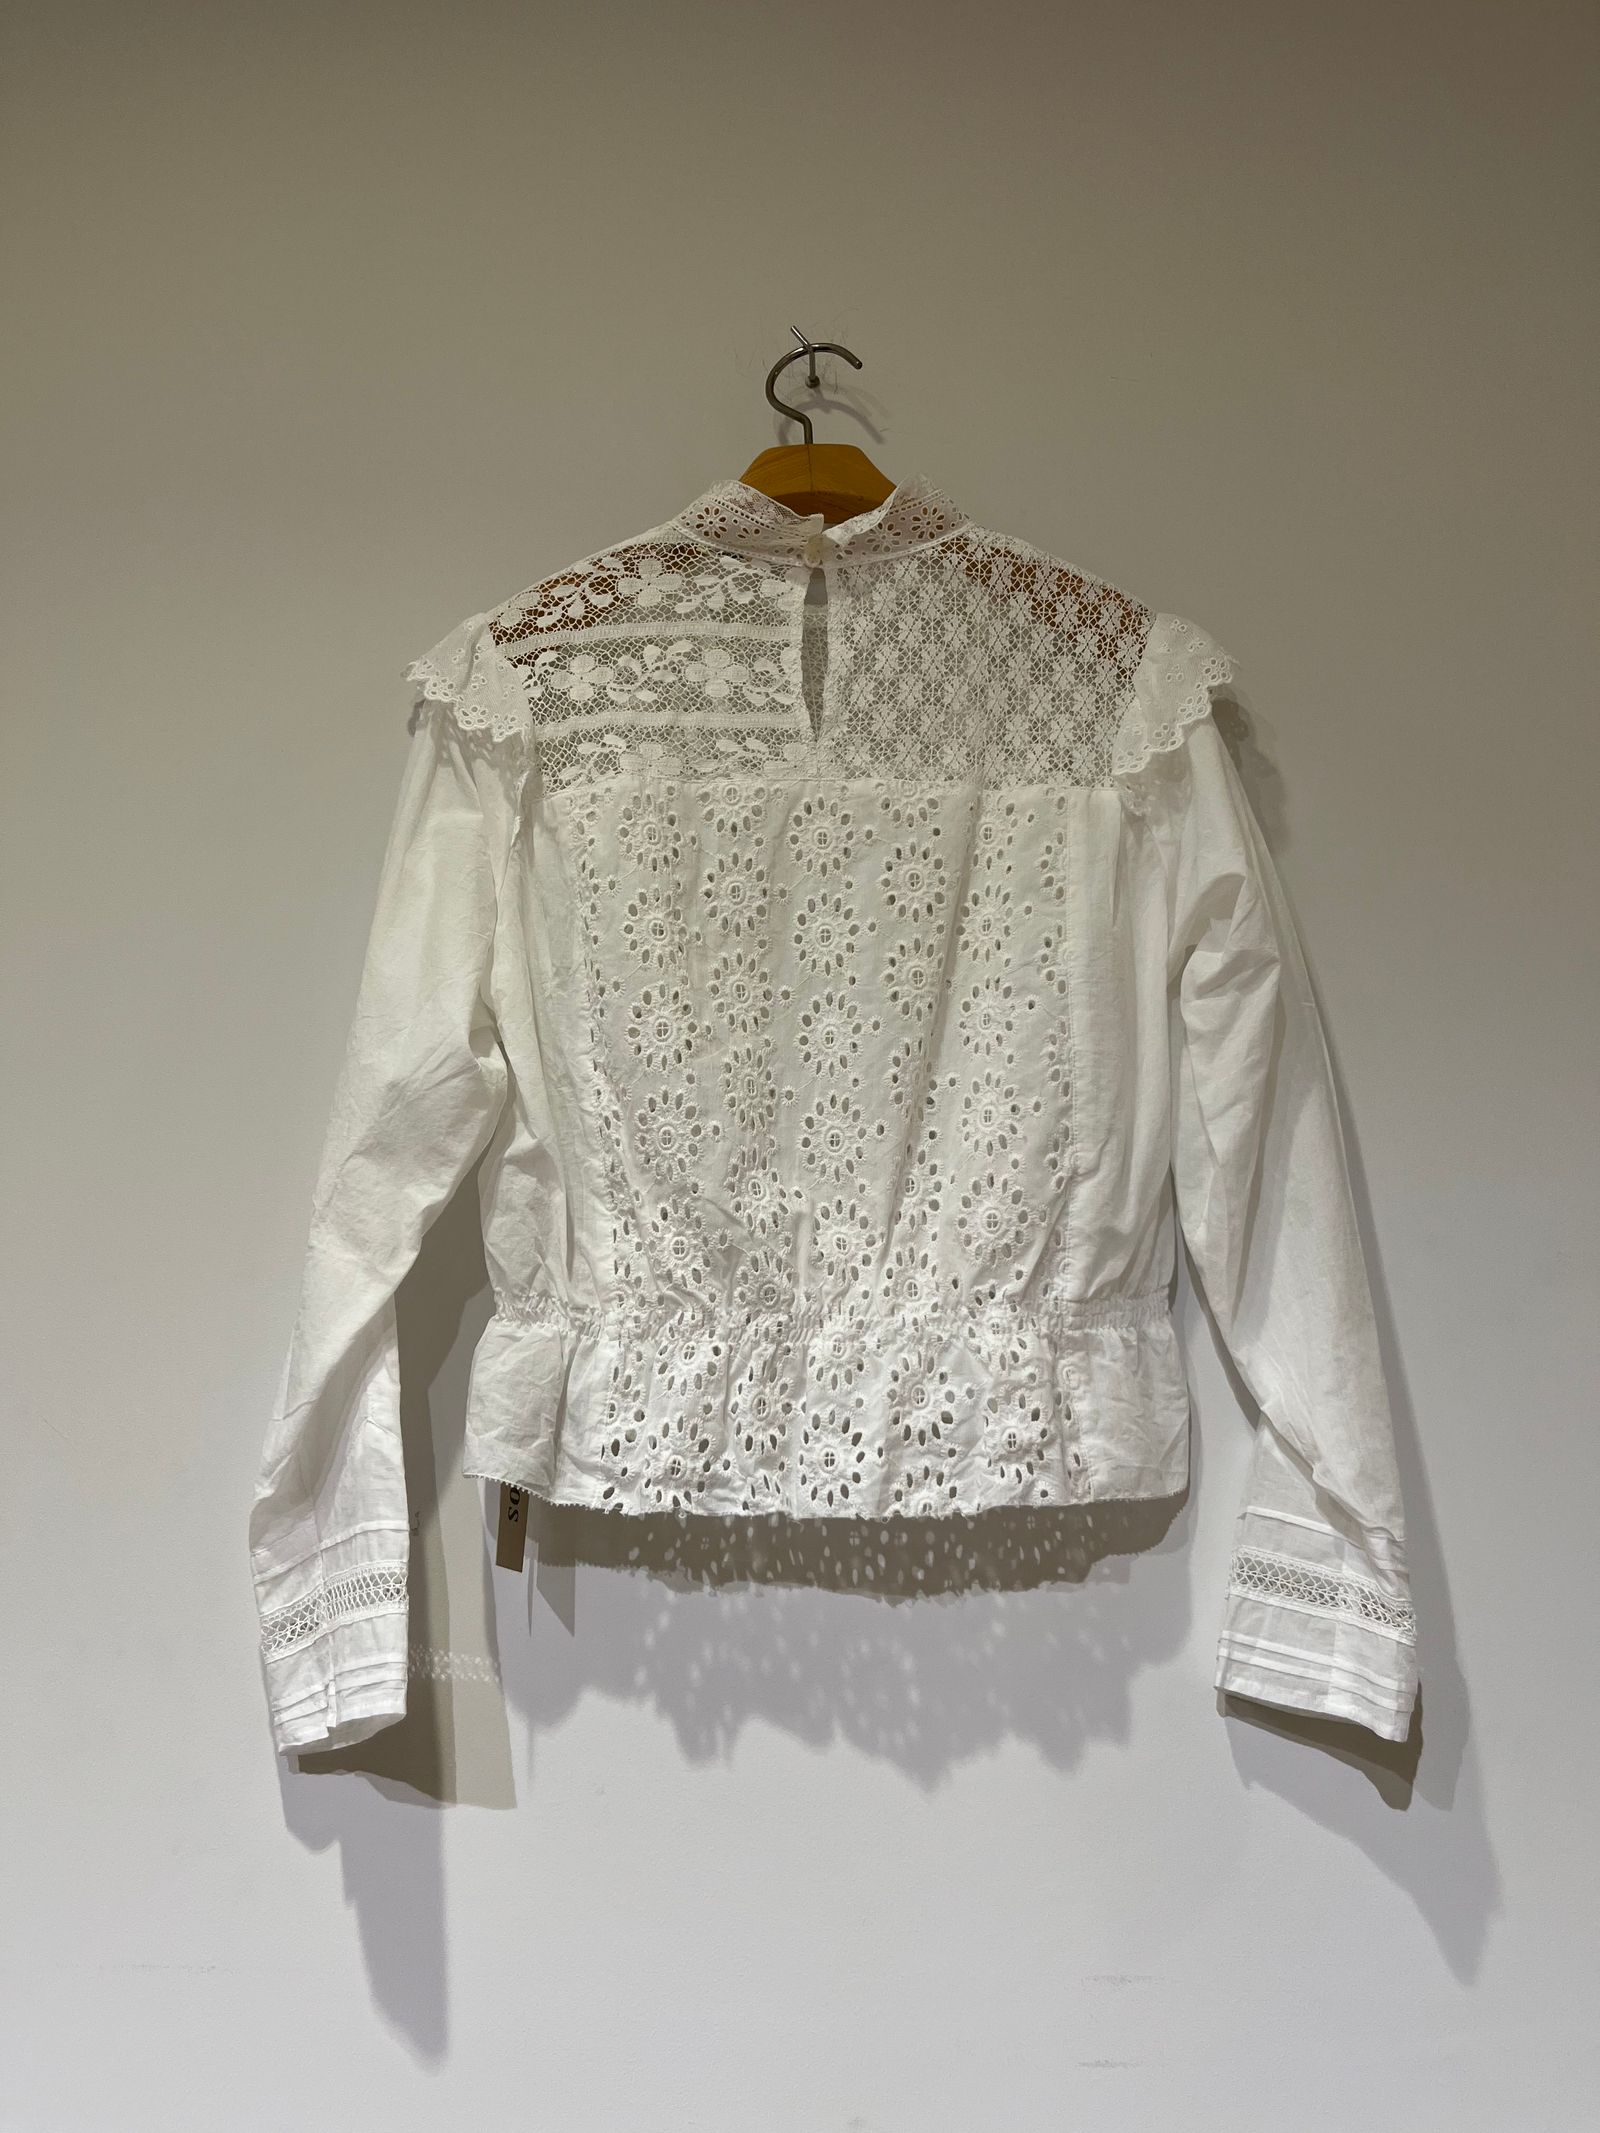 nowos - Lace Blouce レースブラウス nowos 6203005948 | HALLOW's web store